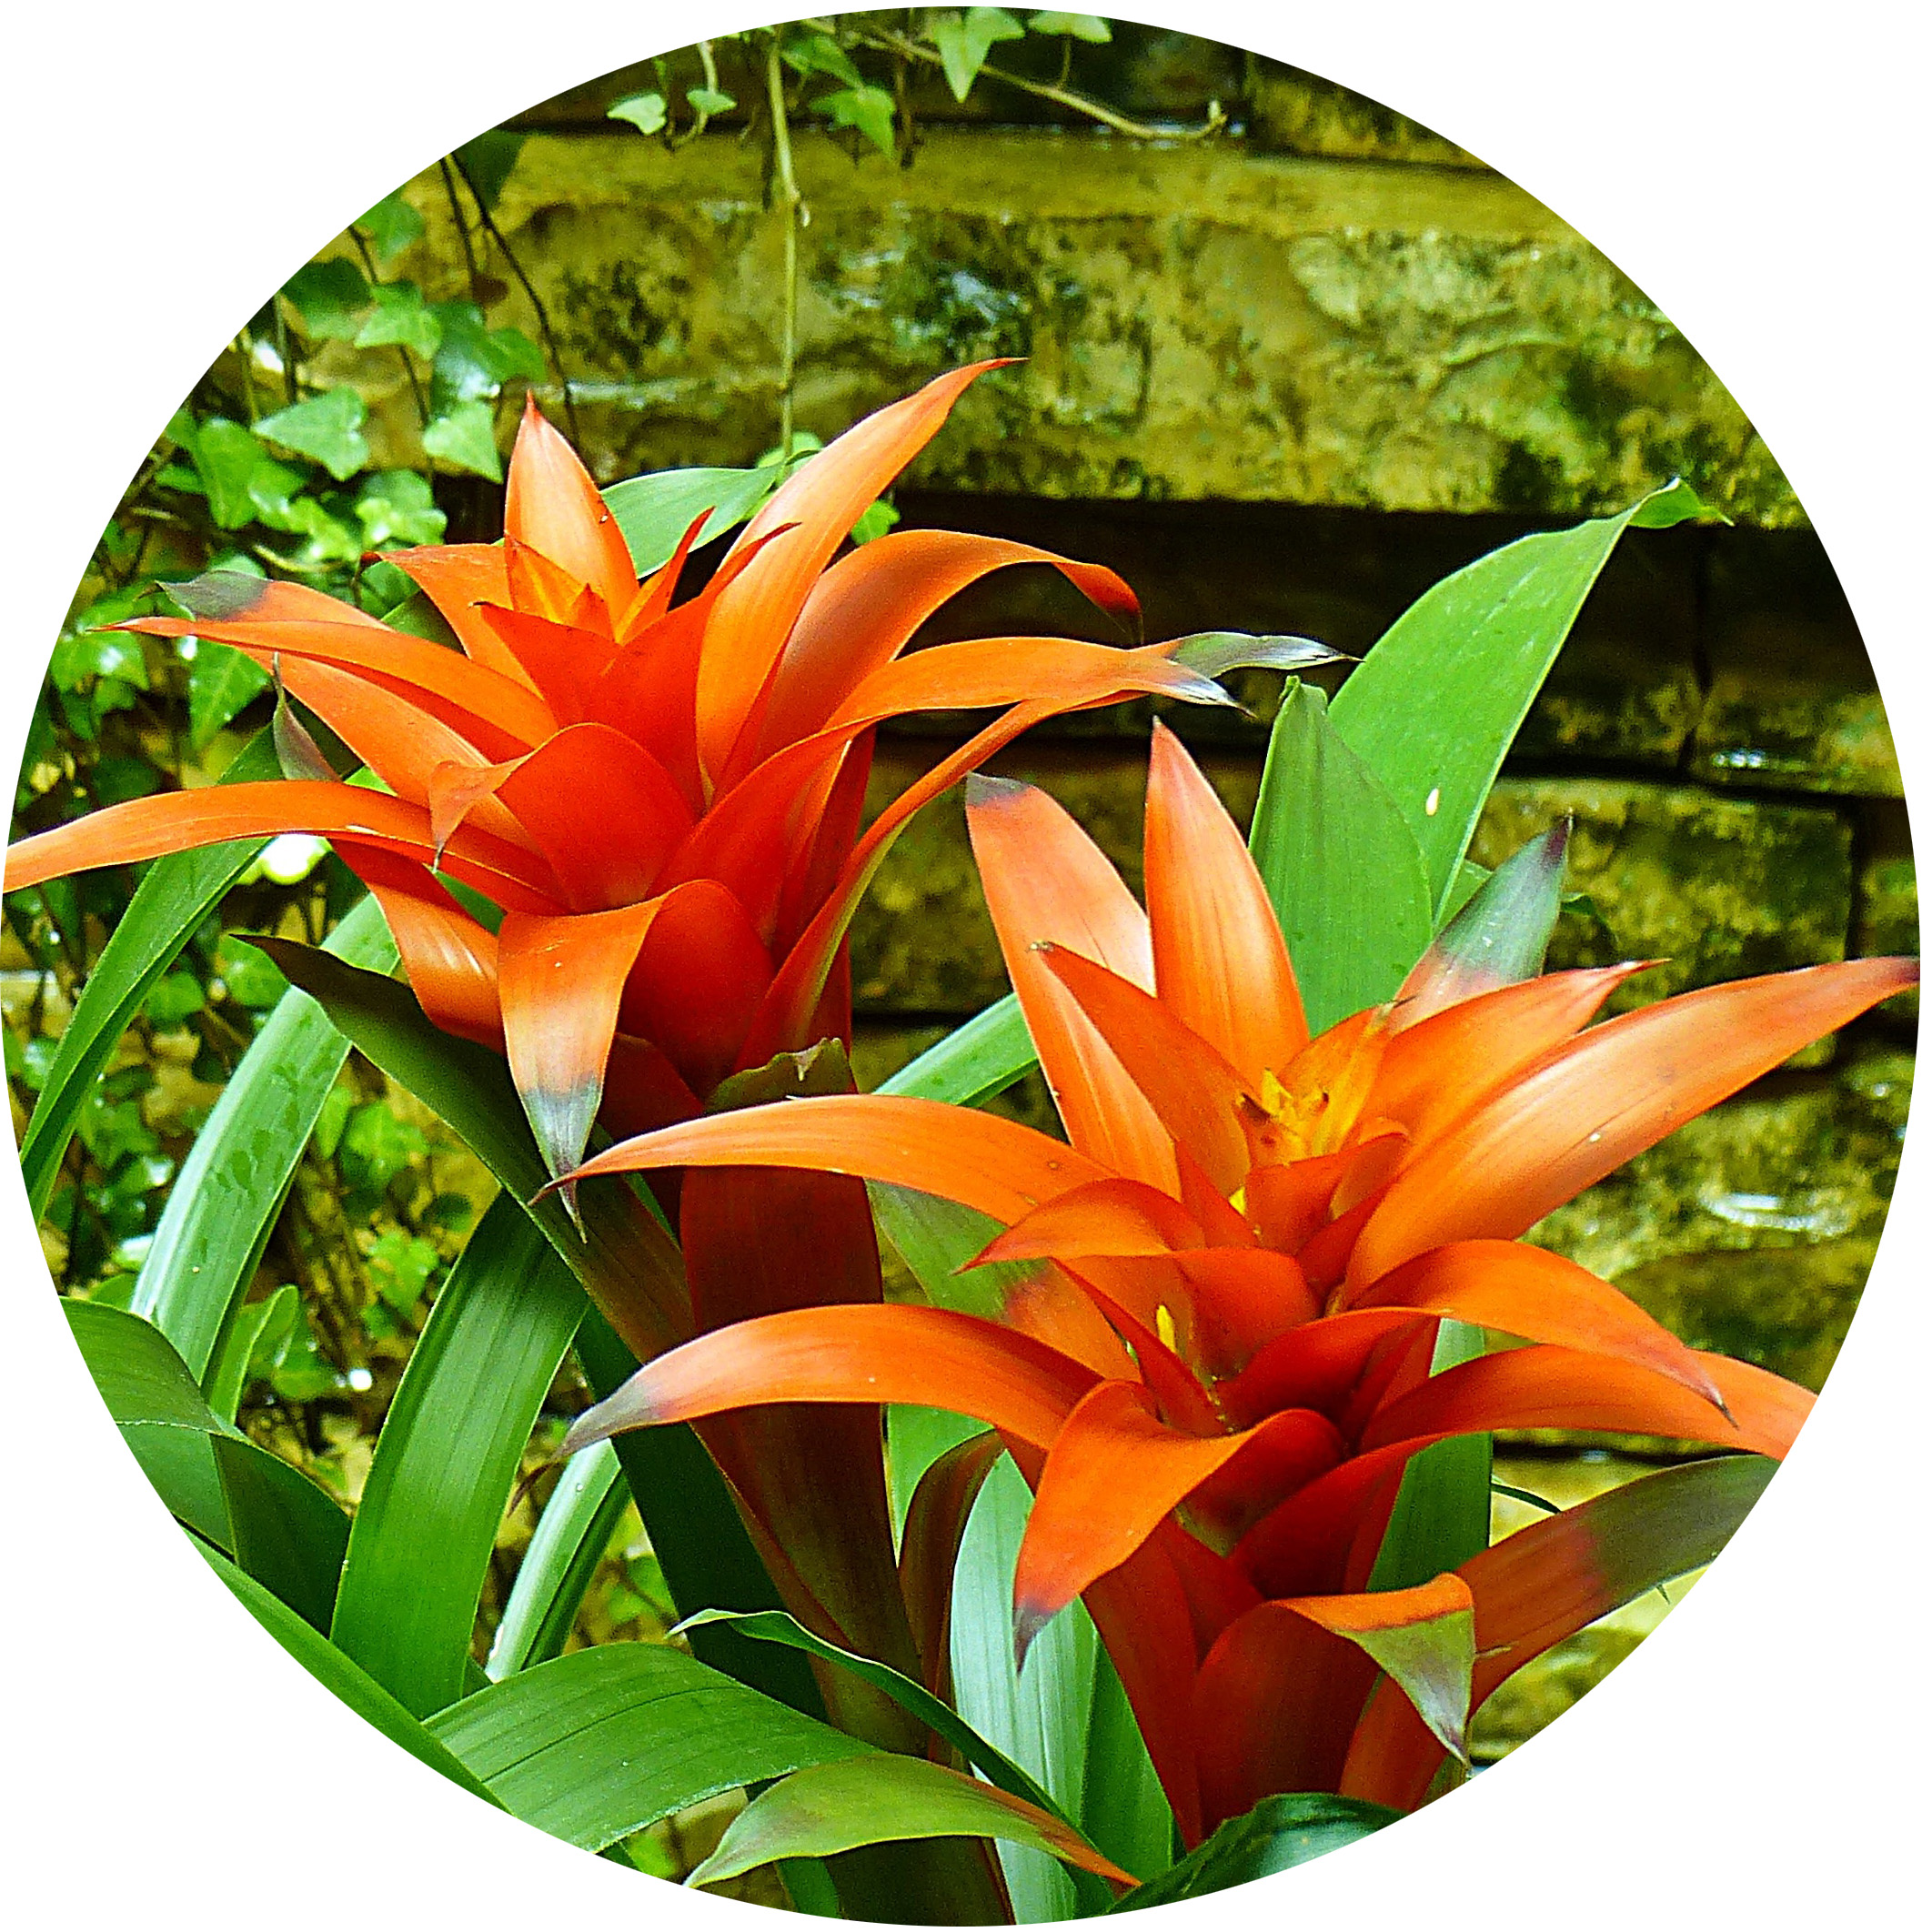 Bromeliad Growing Guide How To Care For Bromeliads Kidsgardening